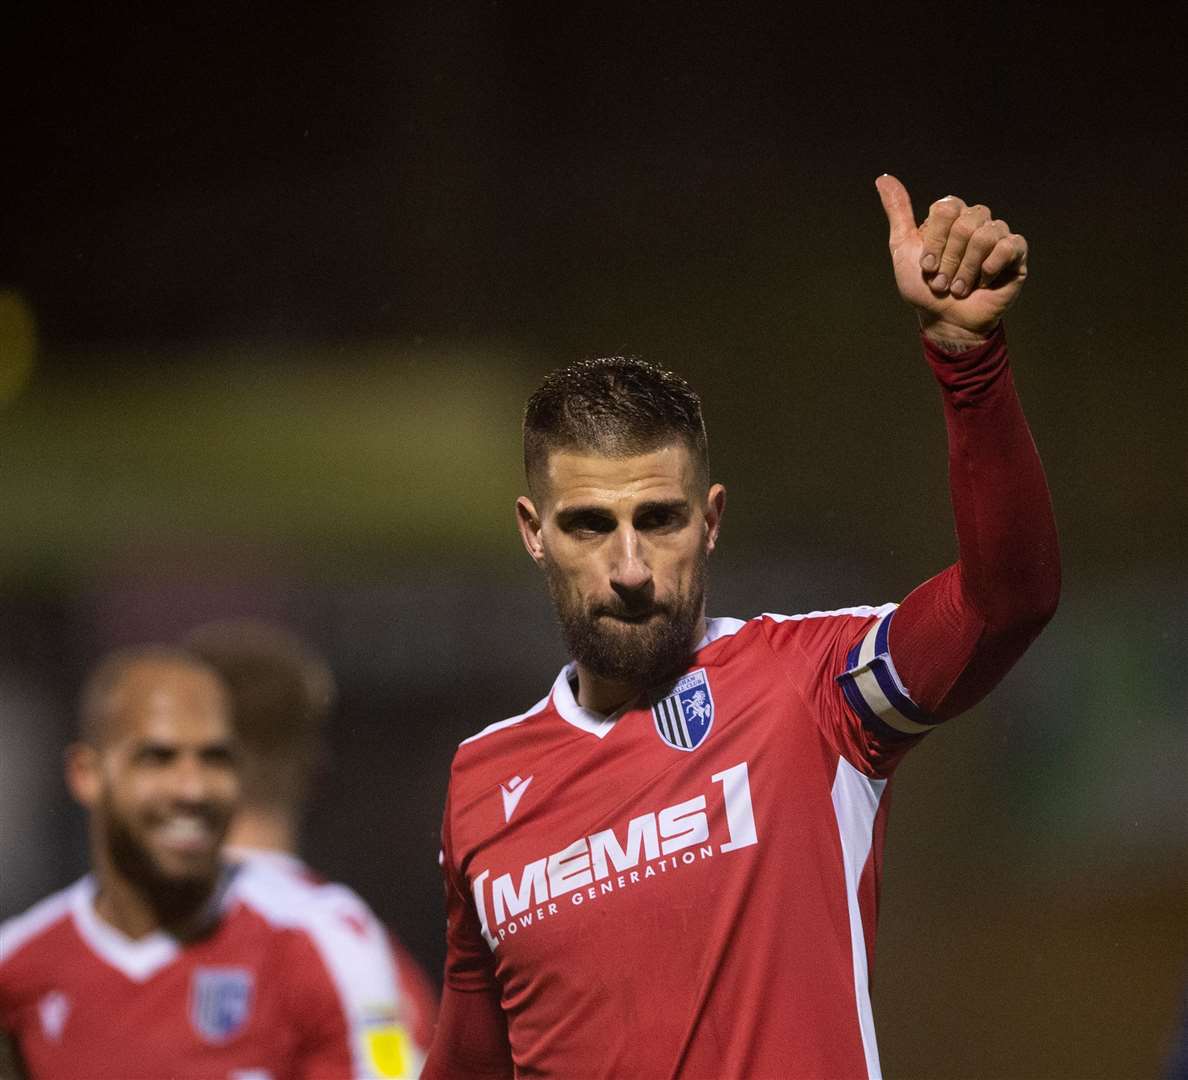 Could Max Ehmer's time at the Gills be up?